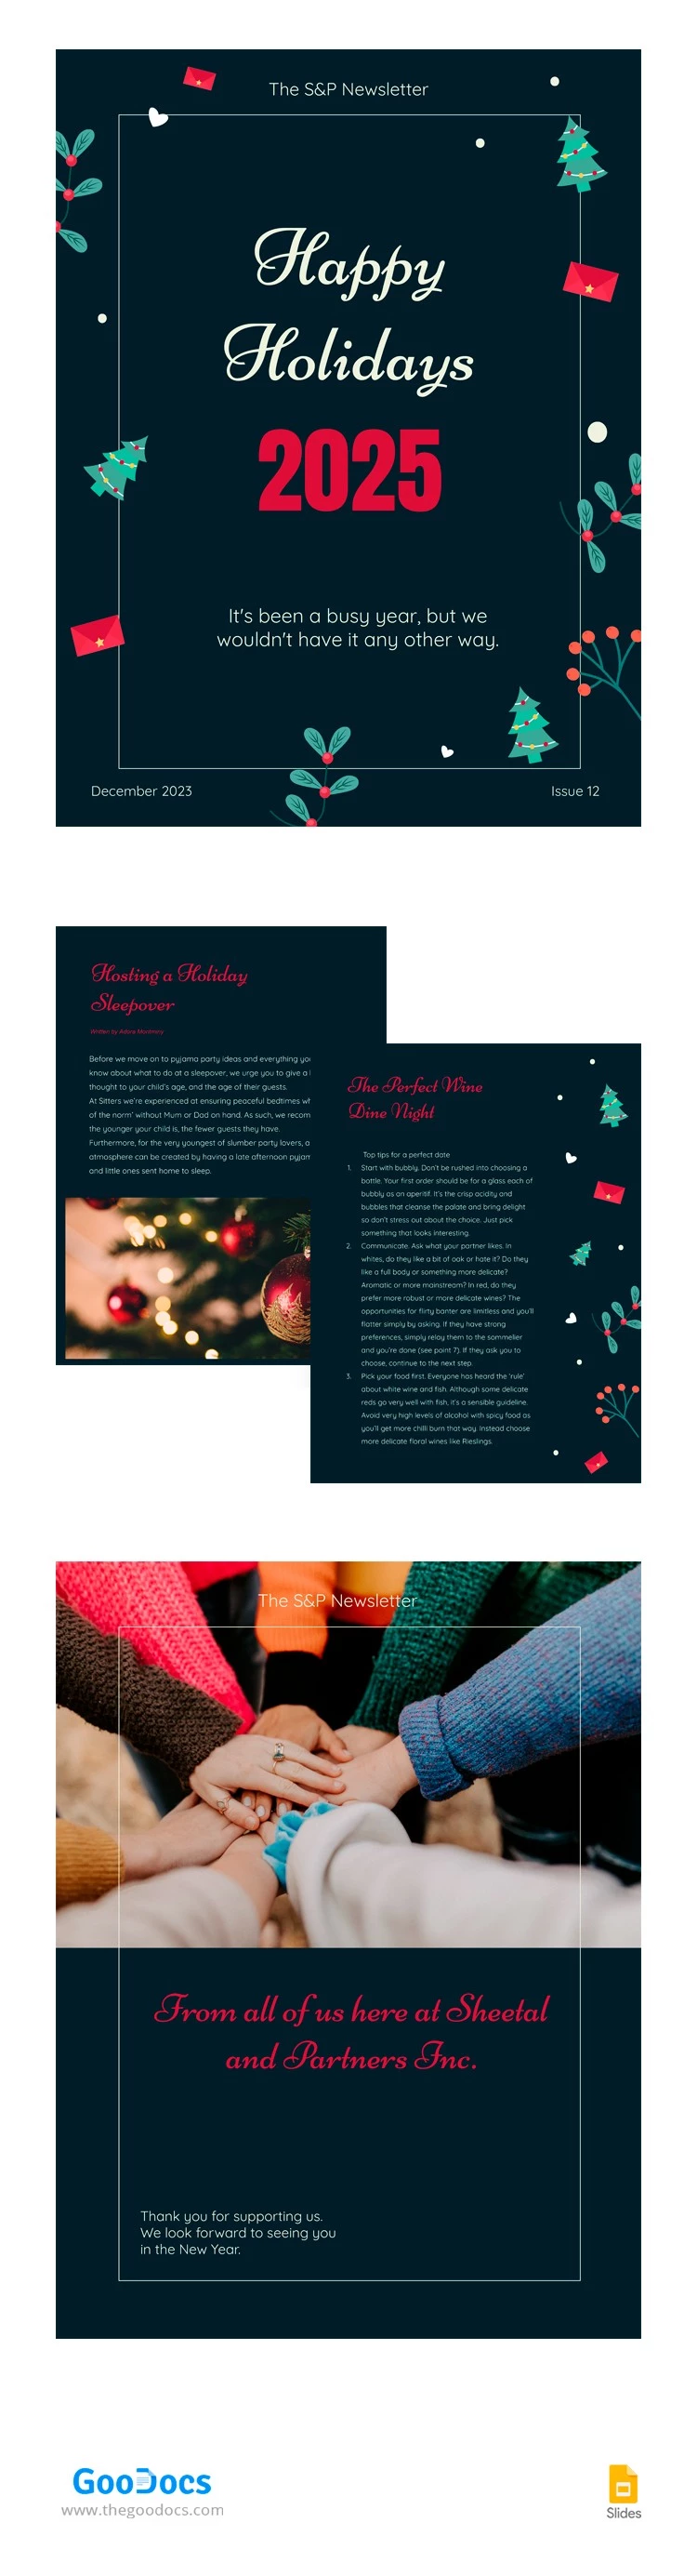 Happy Holiday Newsletter - free Google Docs Template - 10062943